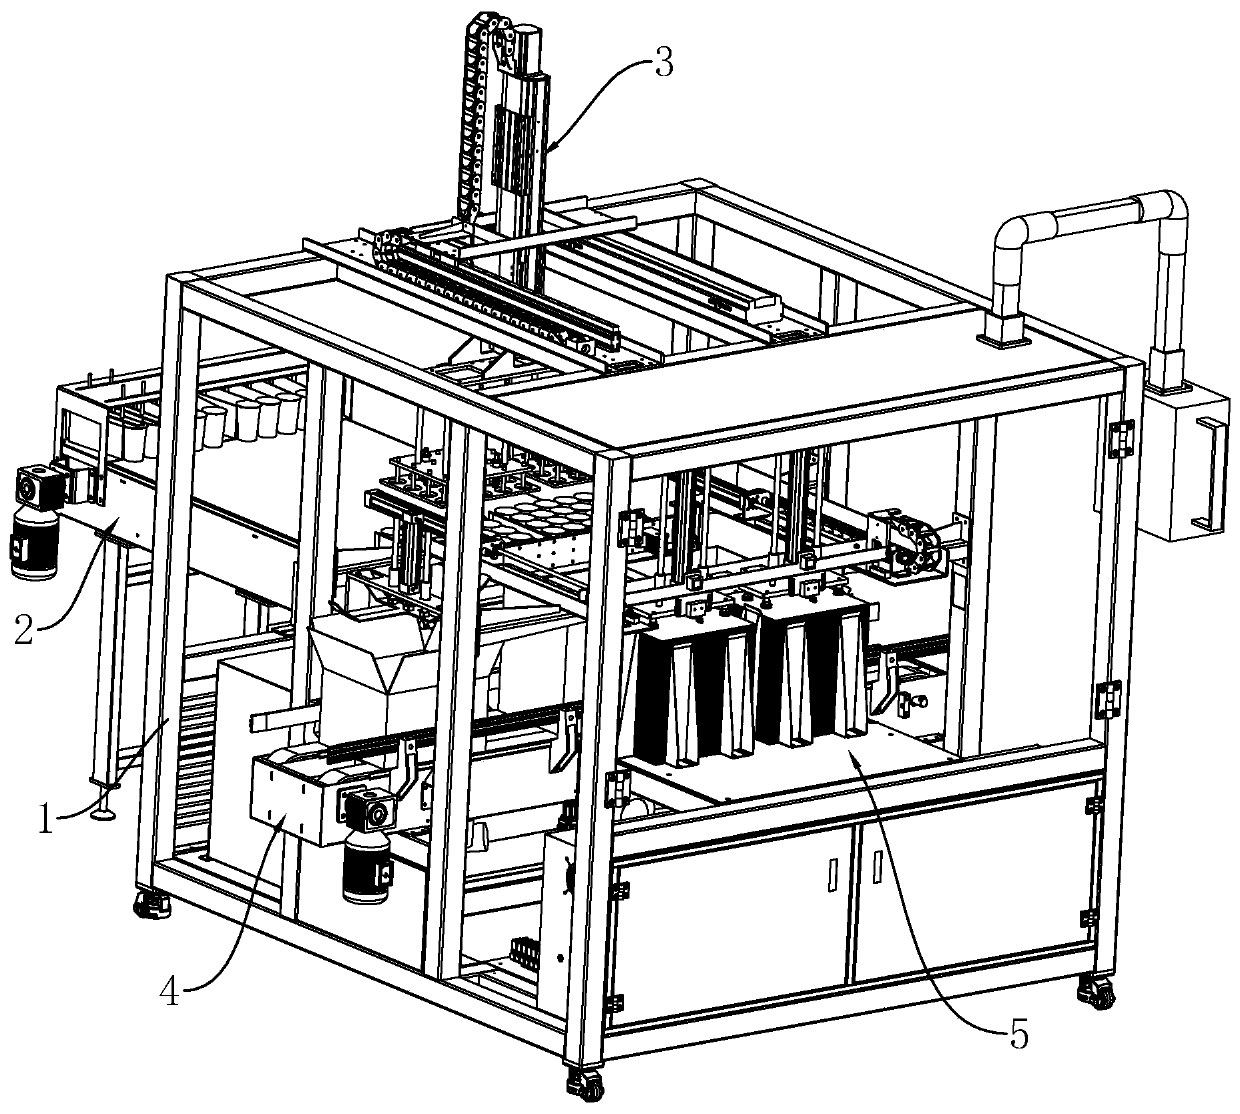 Automatic case packer